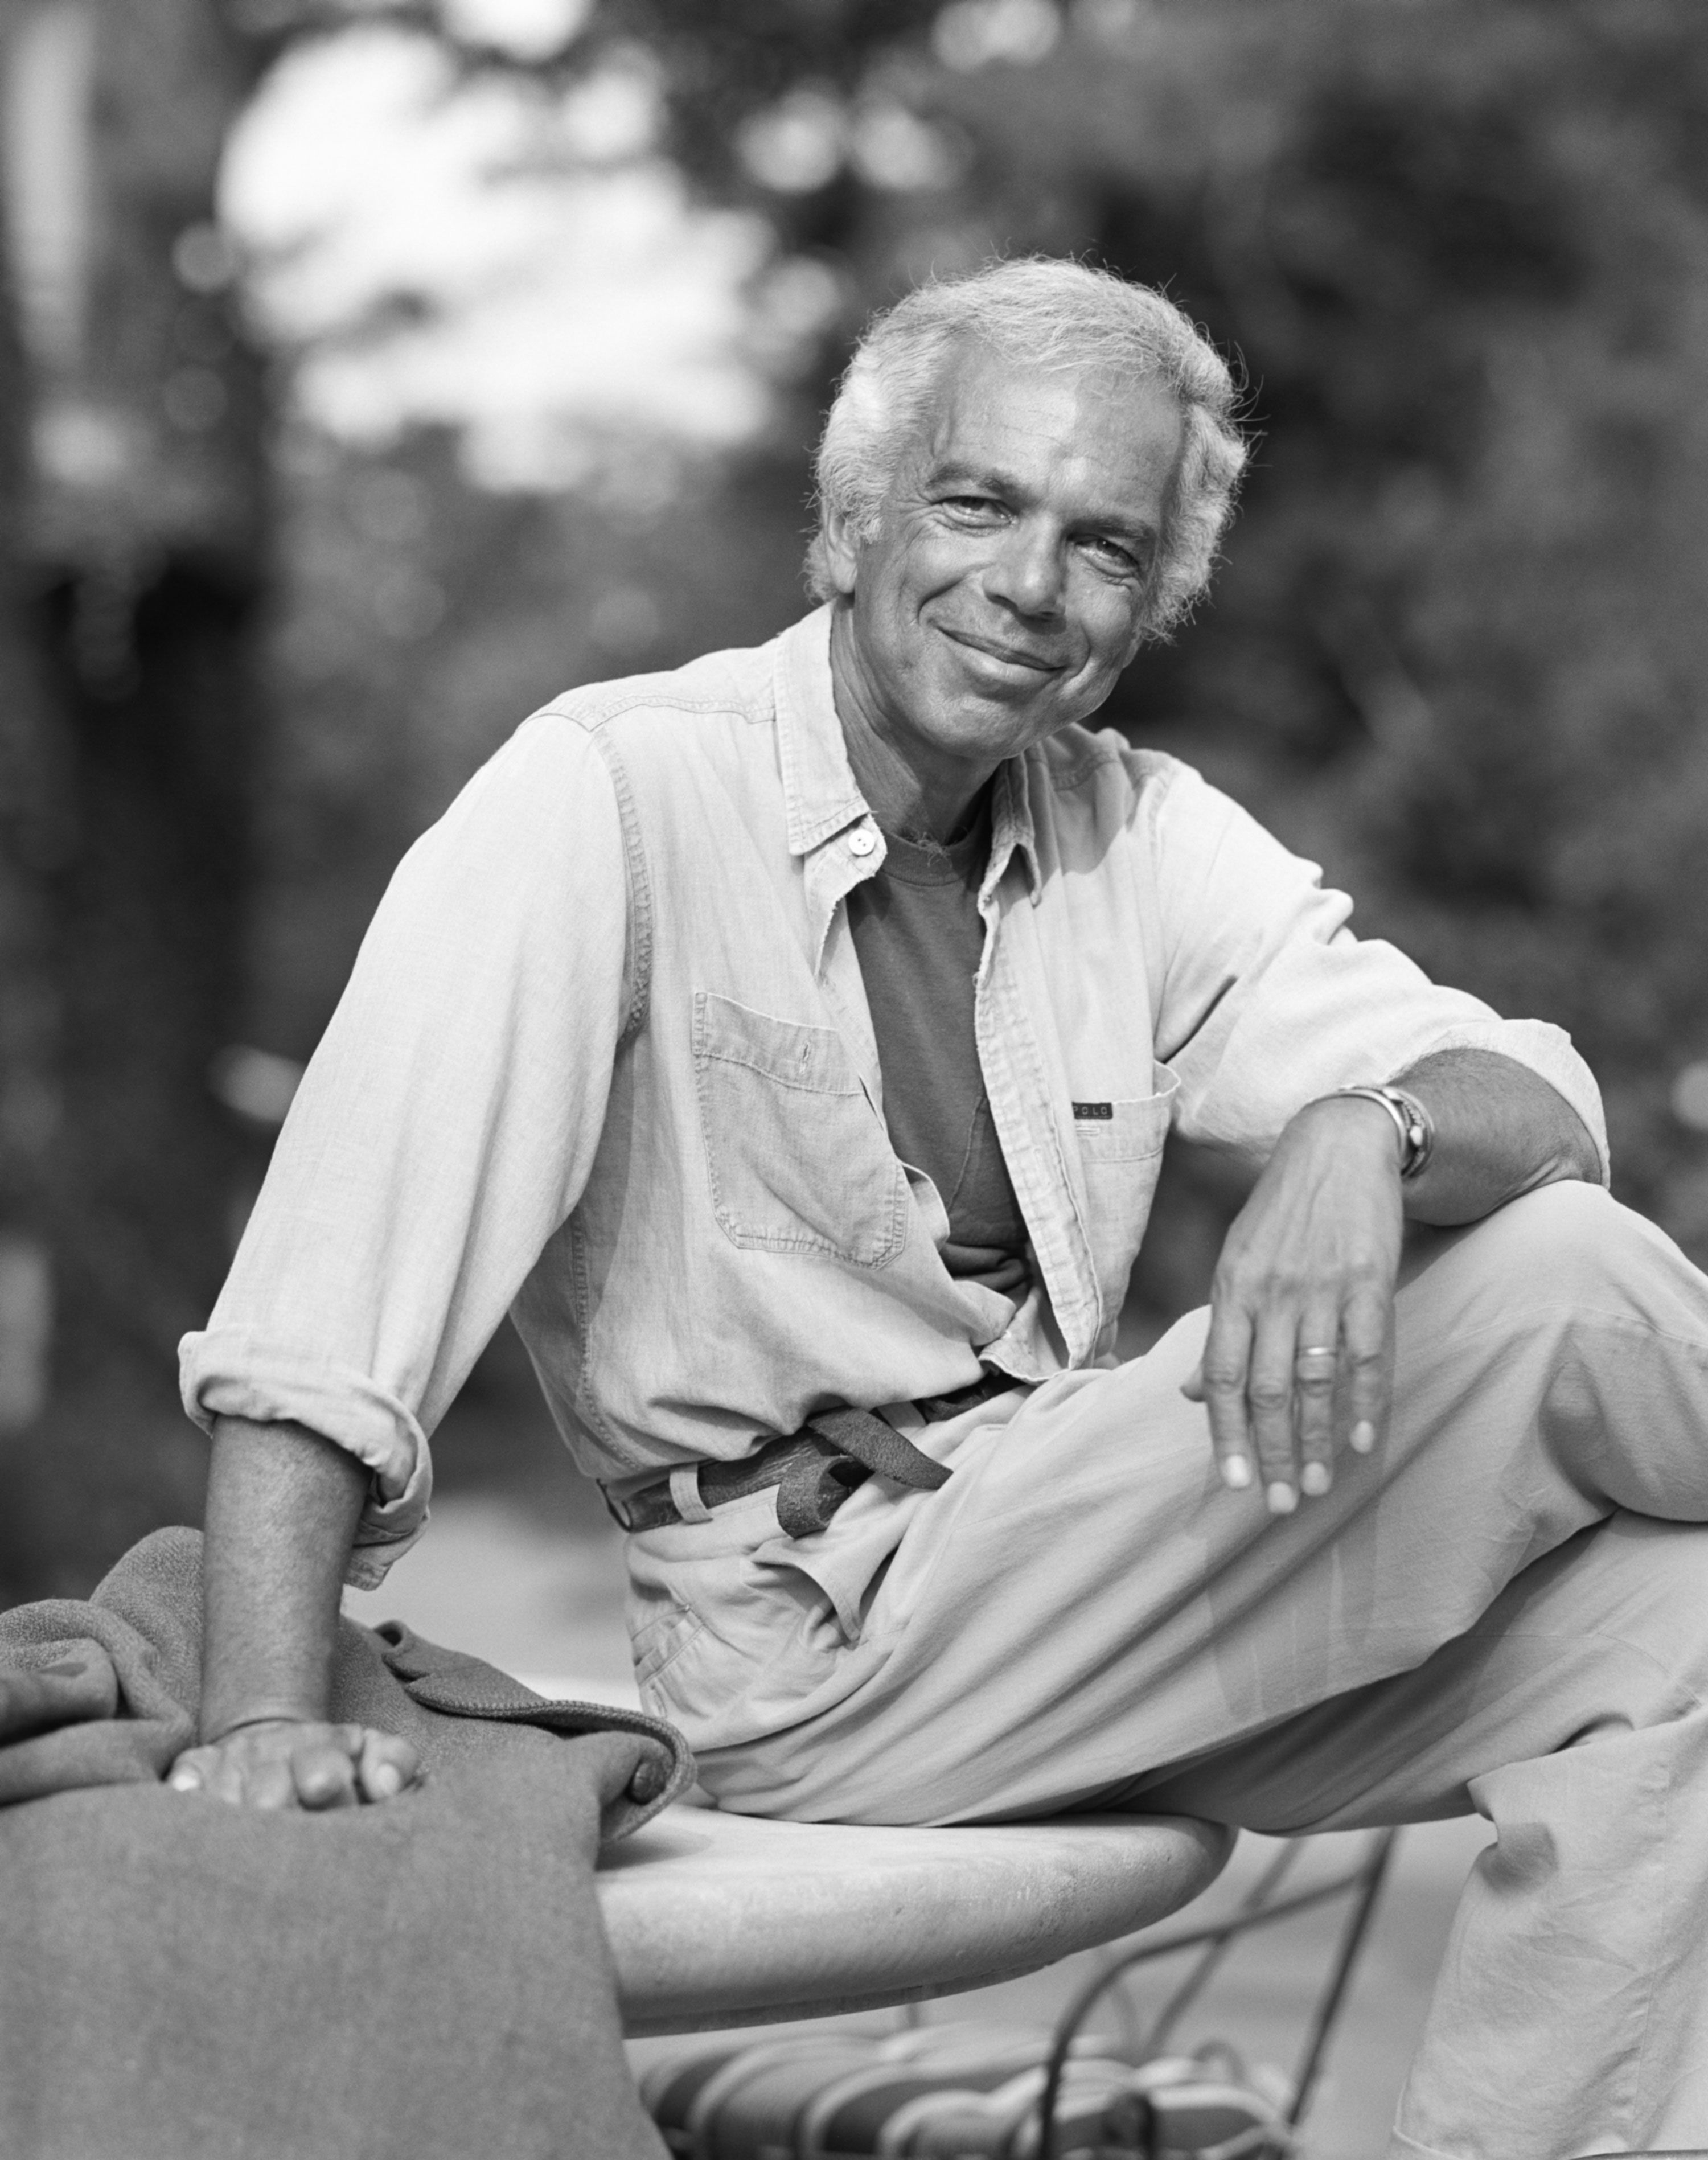 Ralph Lauren: The immigrants' son who built a global fashion